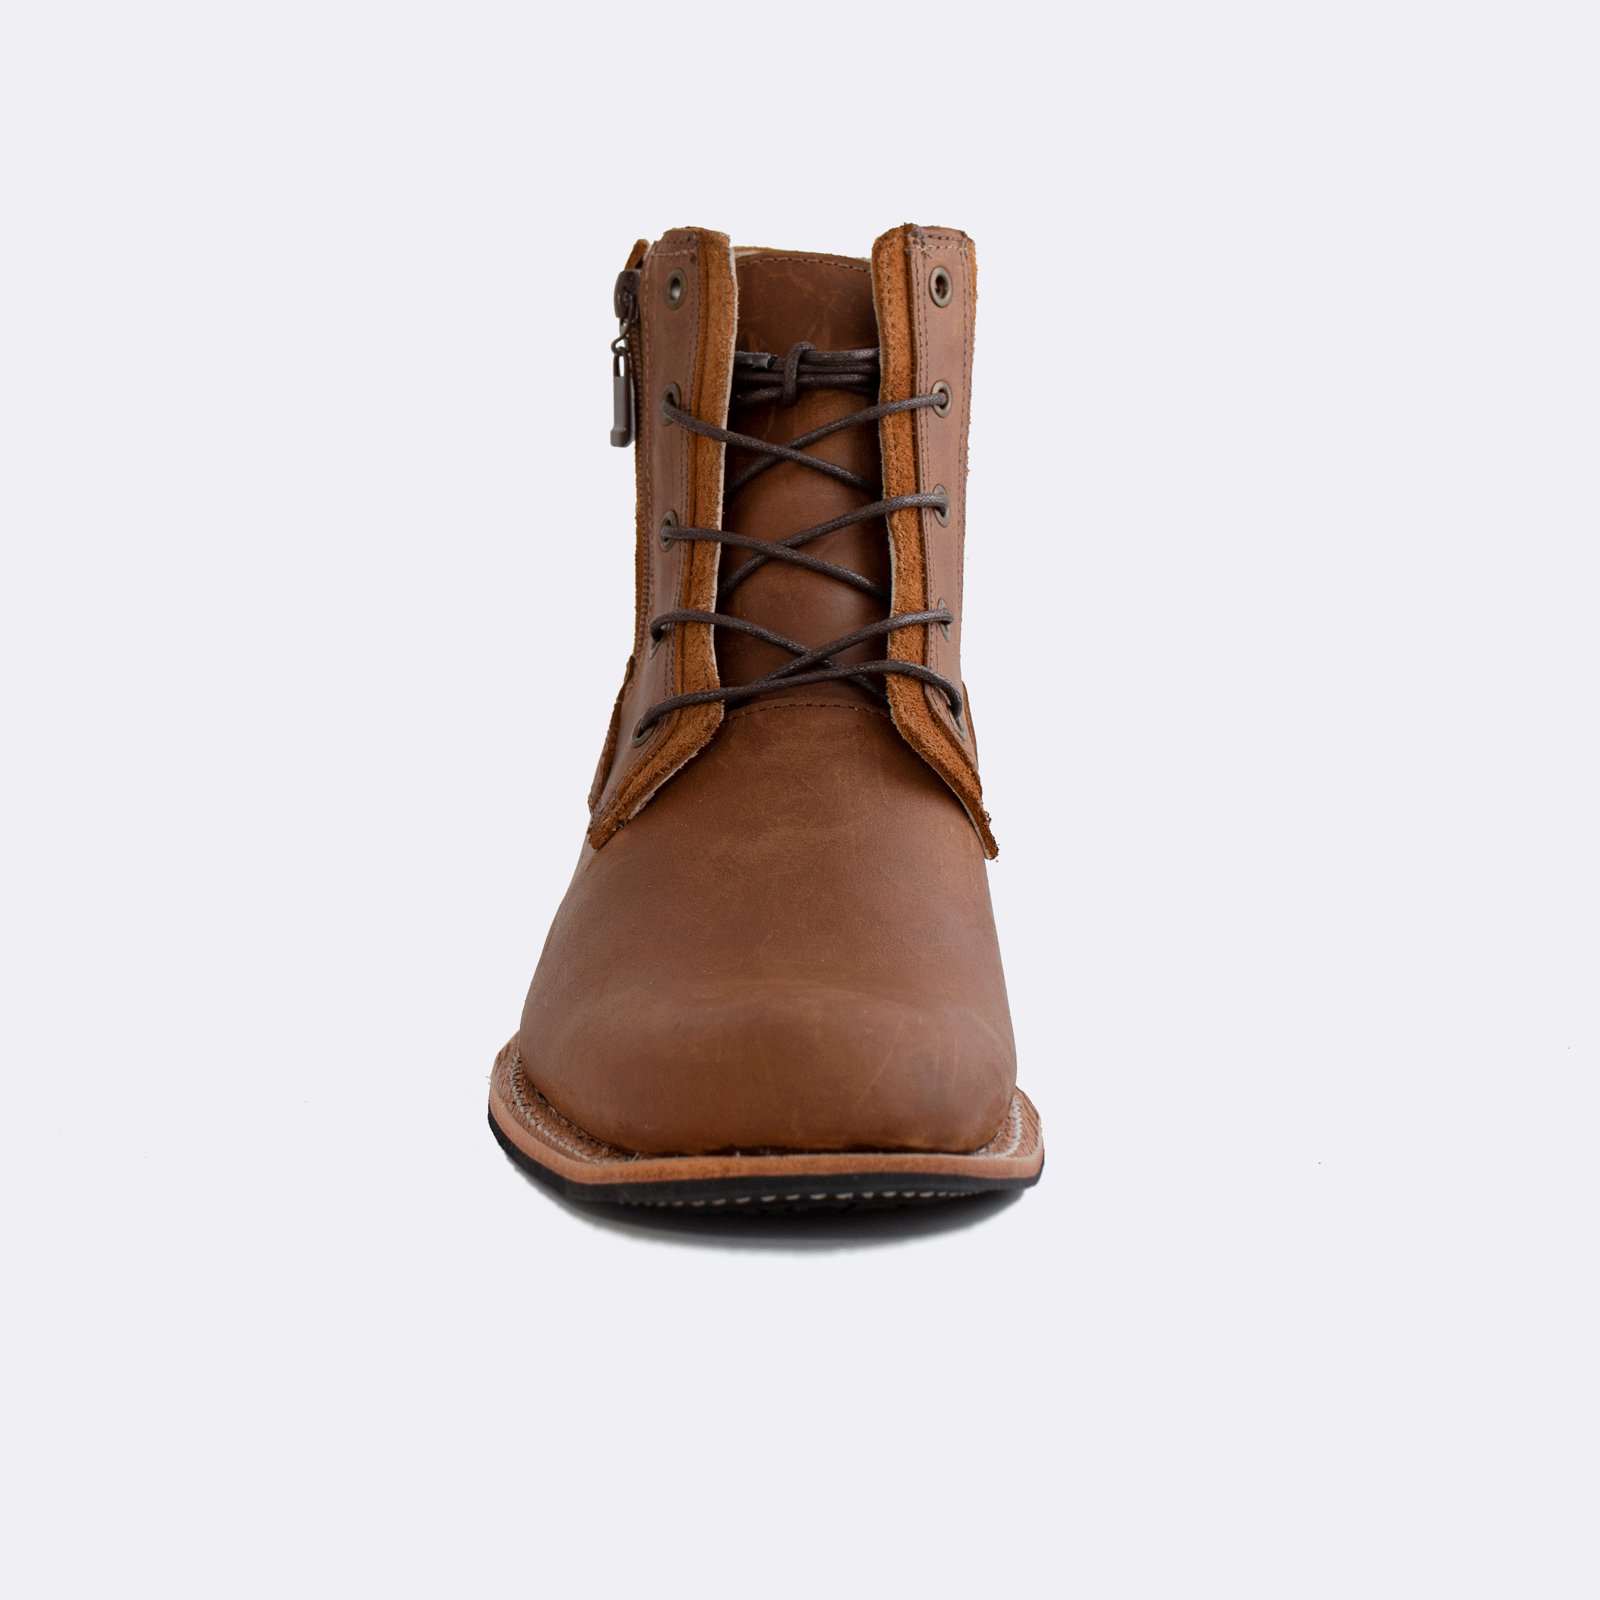 H1233 - Rock Boots! - Brown